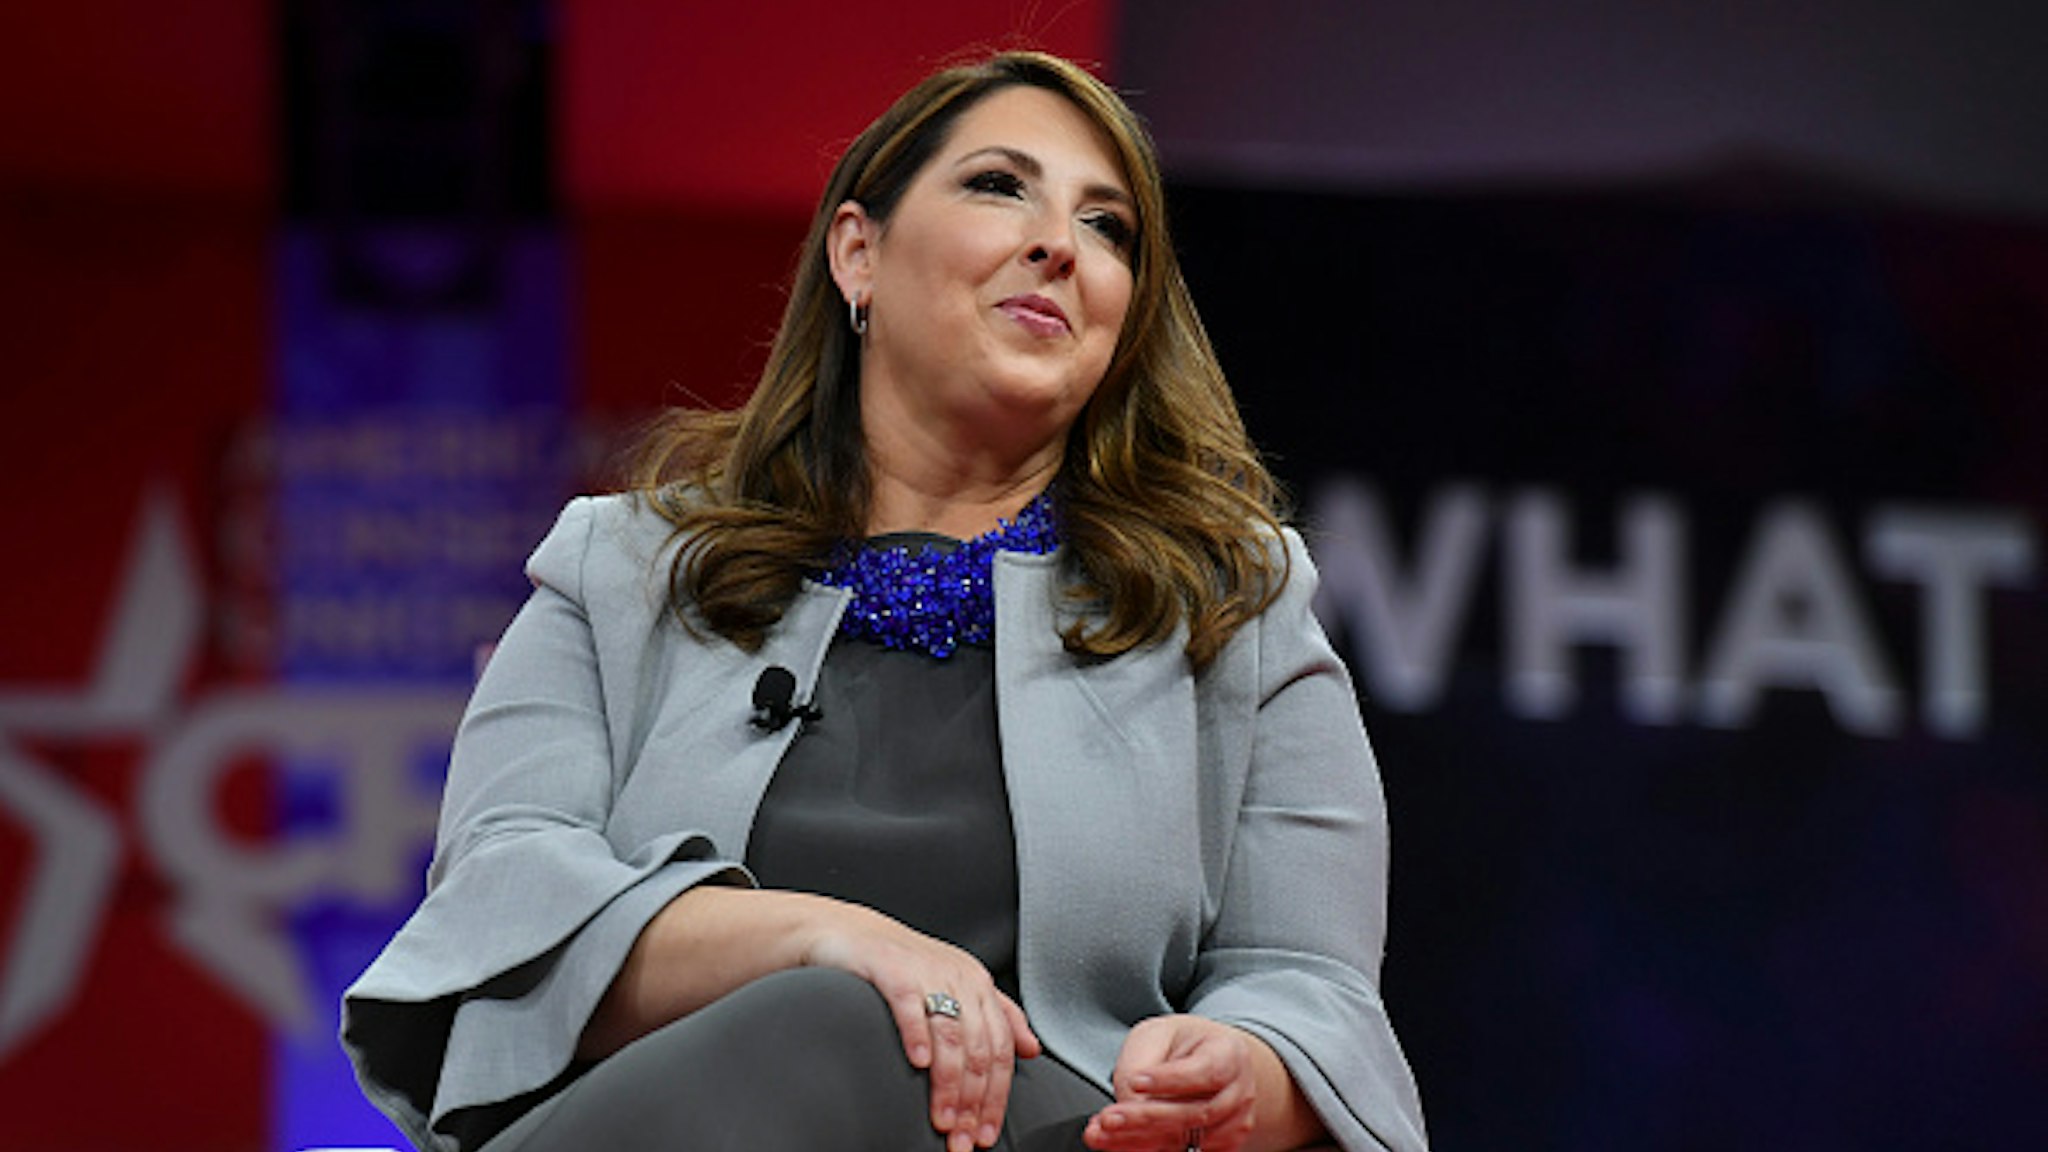 NATIONAL HARBOR, MD - FEBRUARY 28: Ronna McDaniel, Chair of the Republican National Committee speaks during a session at CPAC 2019 on February 28, 2019 in National Harbor, Md.